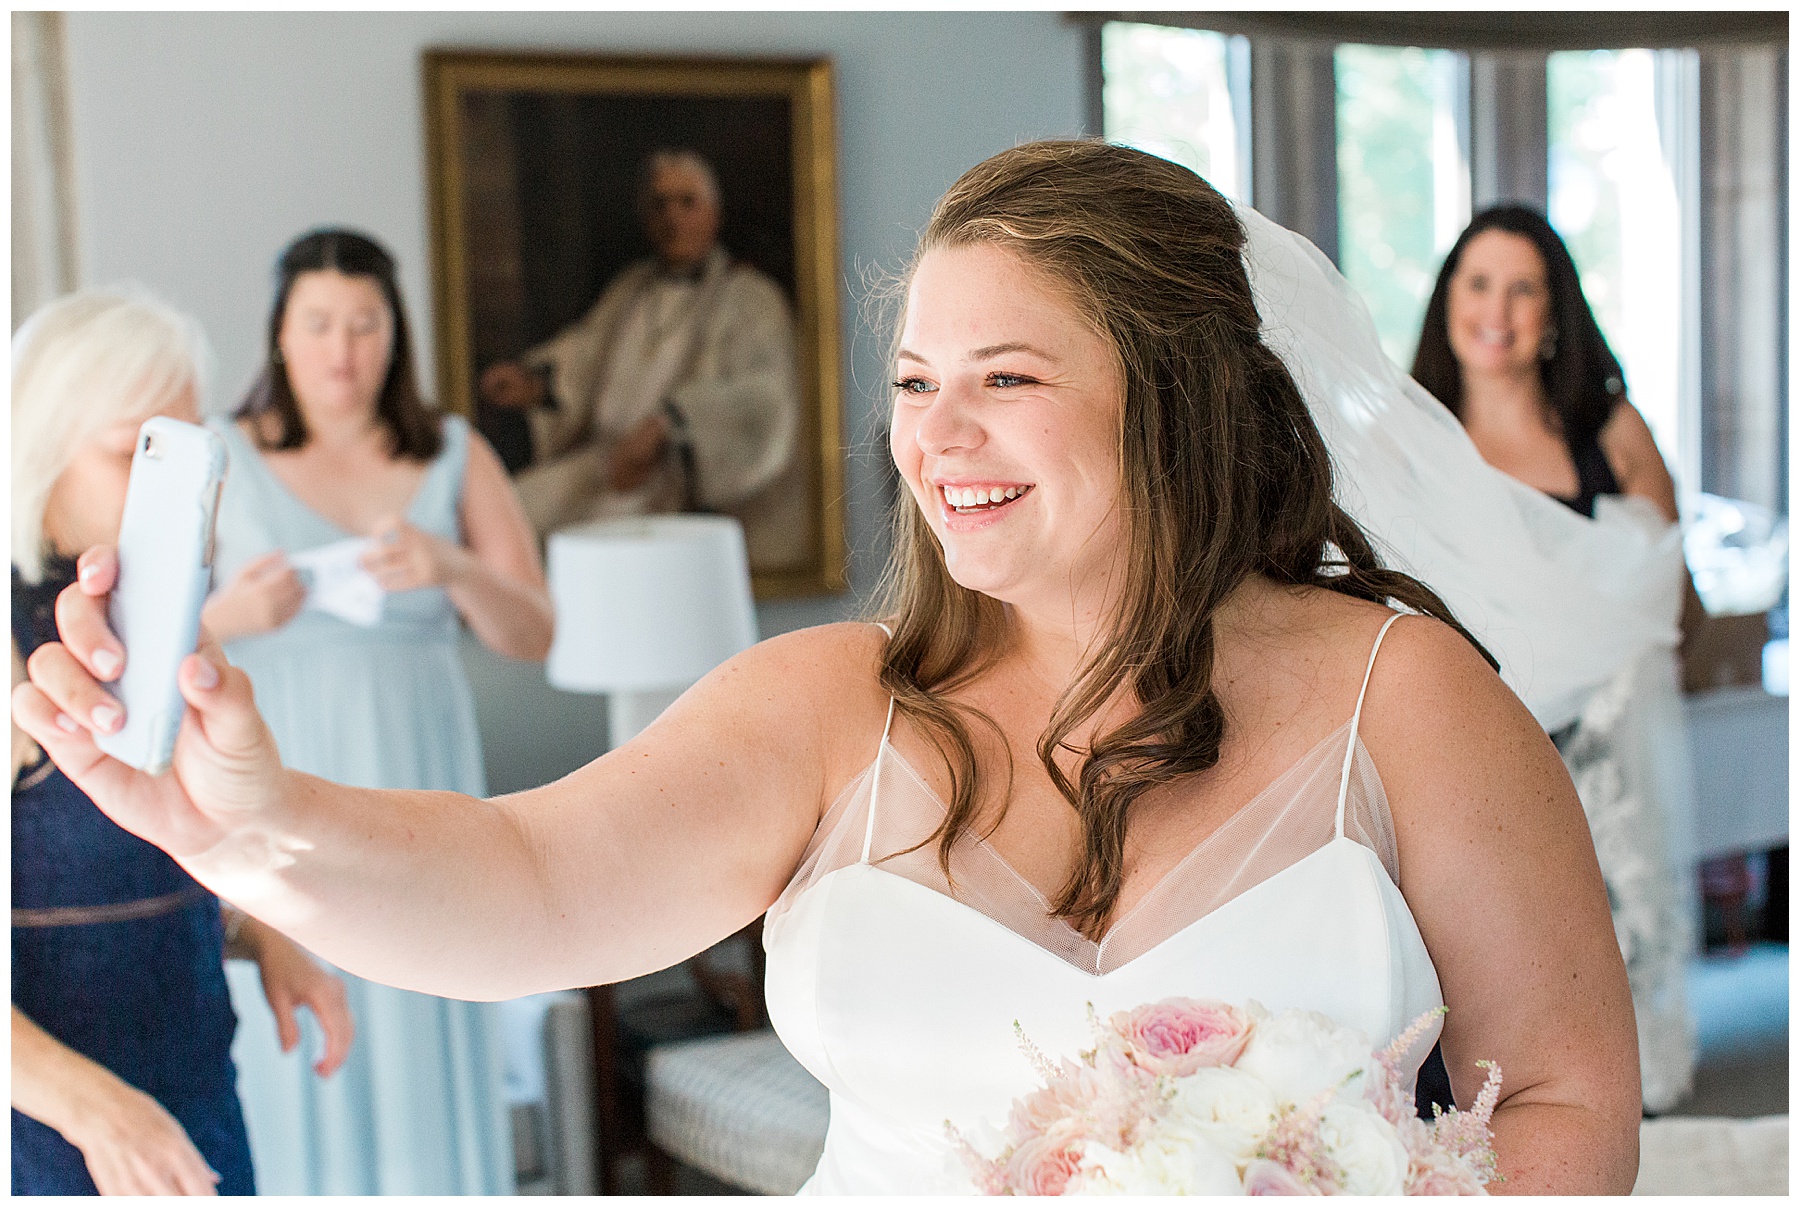 Darien Wedding Bride Greeting Family On Phone While Getting Ready for Wedding